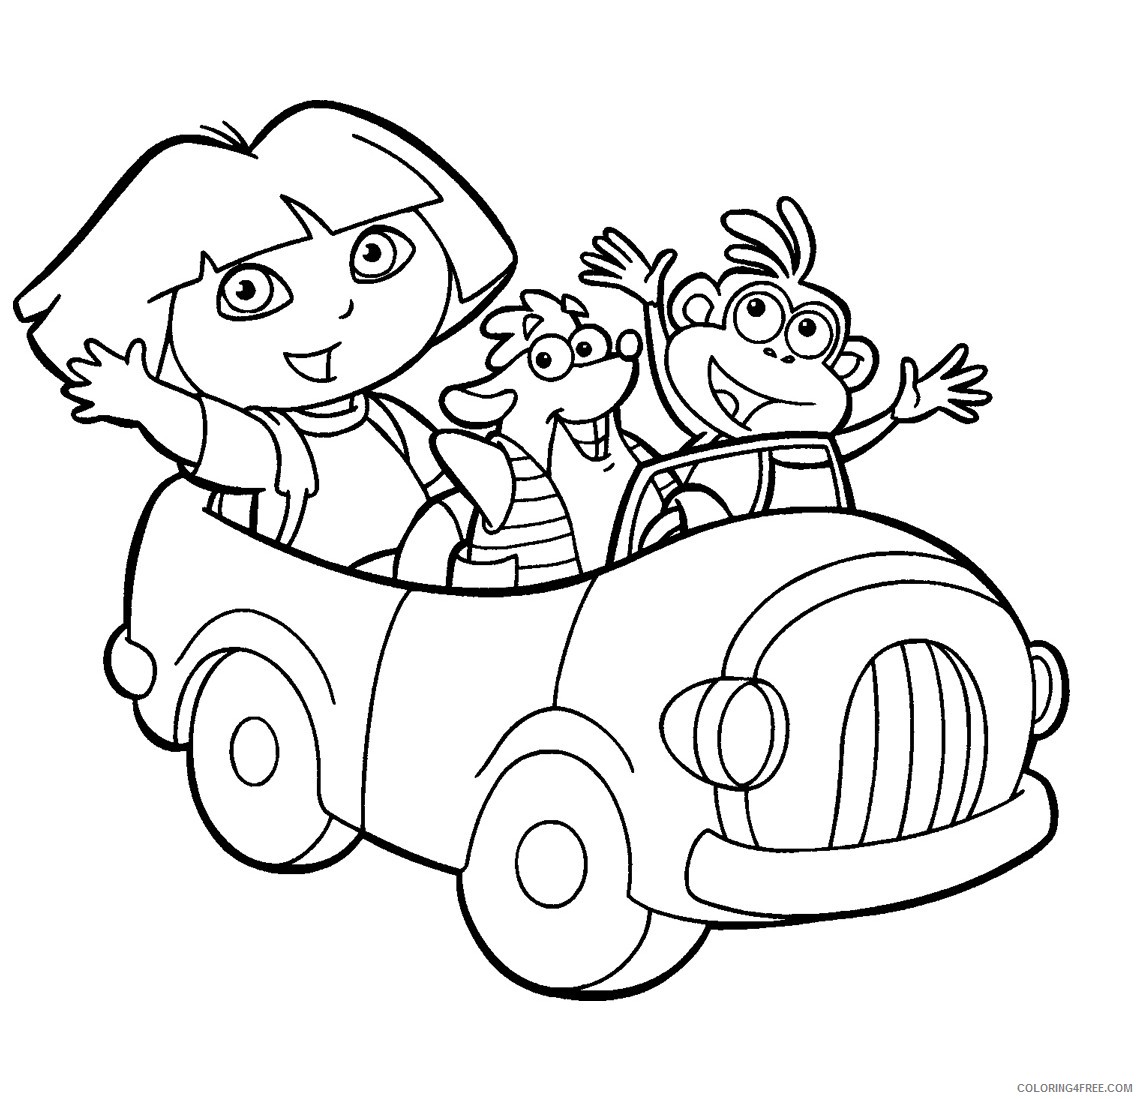 Dora the Explorer Coloring Pages Cartoons Free Dora Printable 2020 2712 Coloring4free